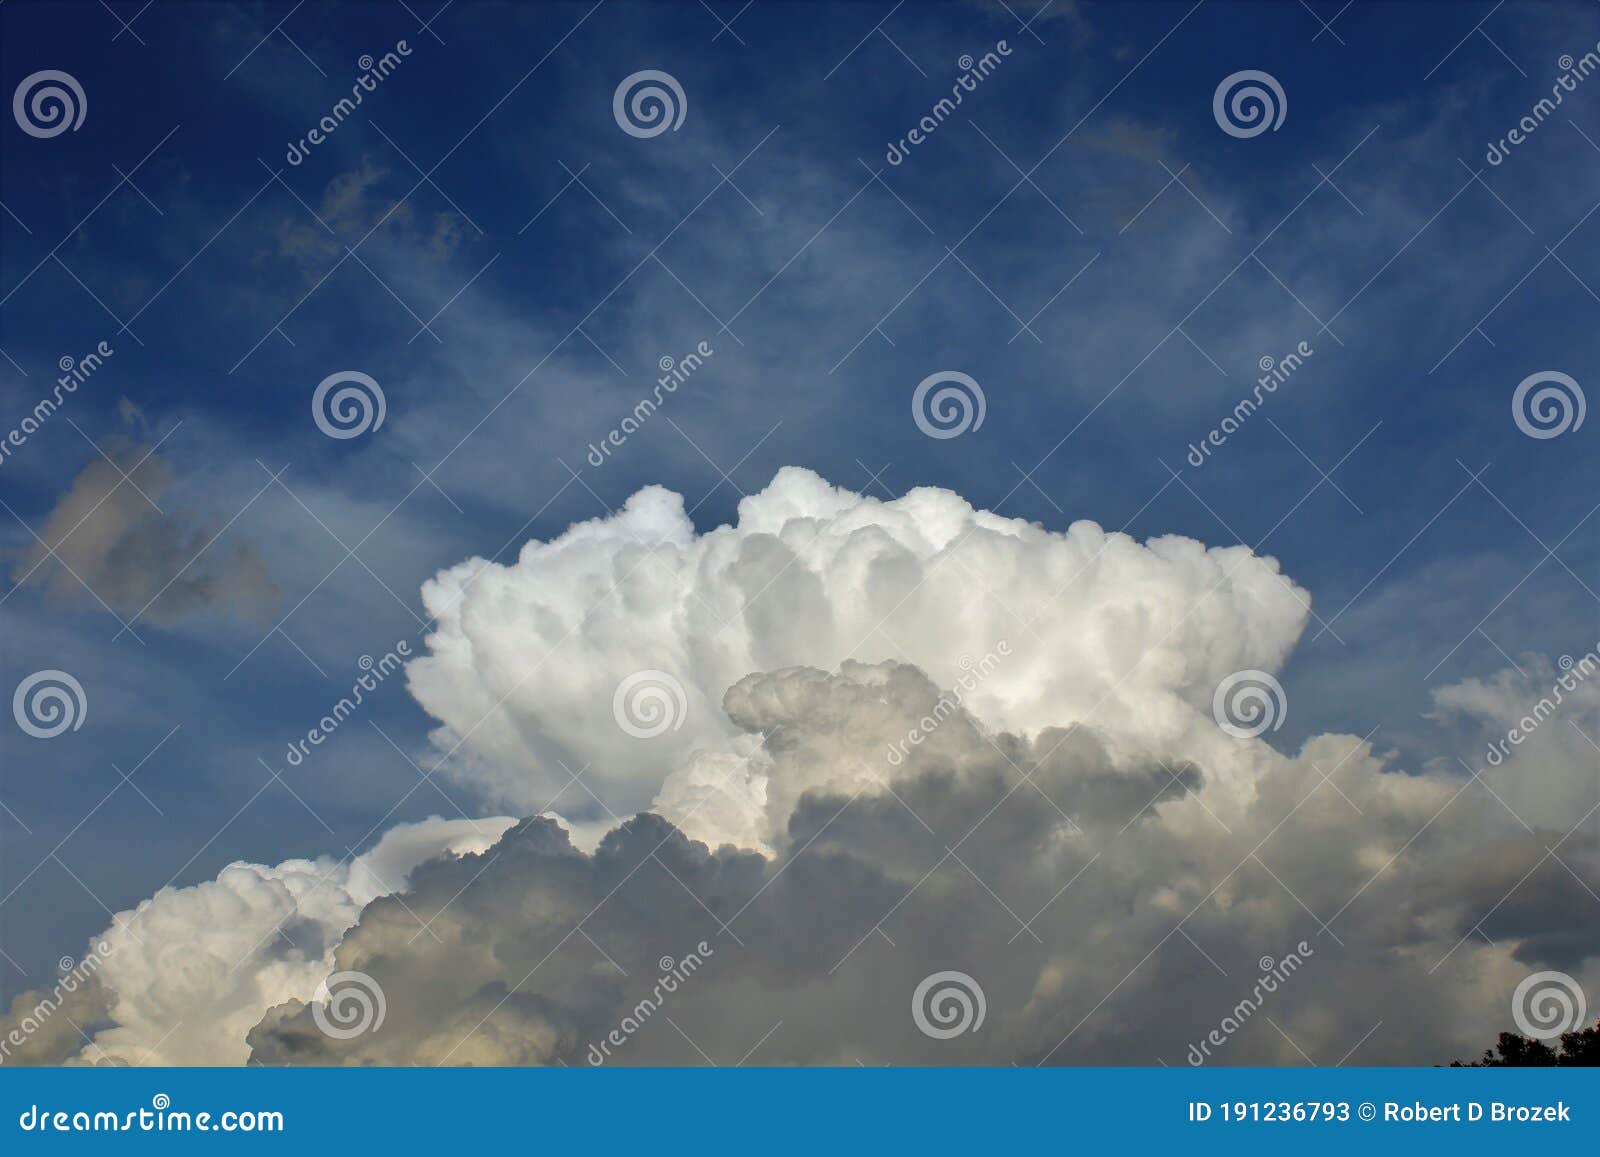 Columbus Nimbus Clouds With Blue Sky In The Background. Stock Image - Image  of white, cloudscape: 191236793